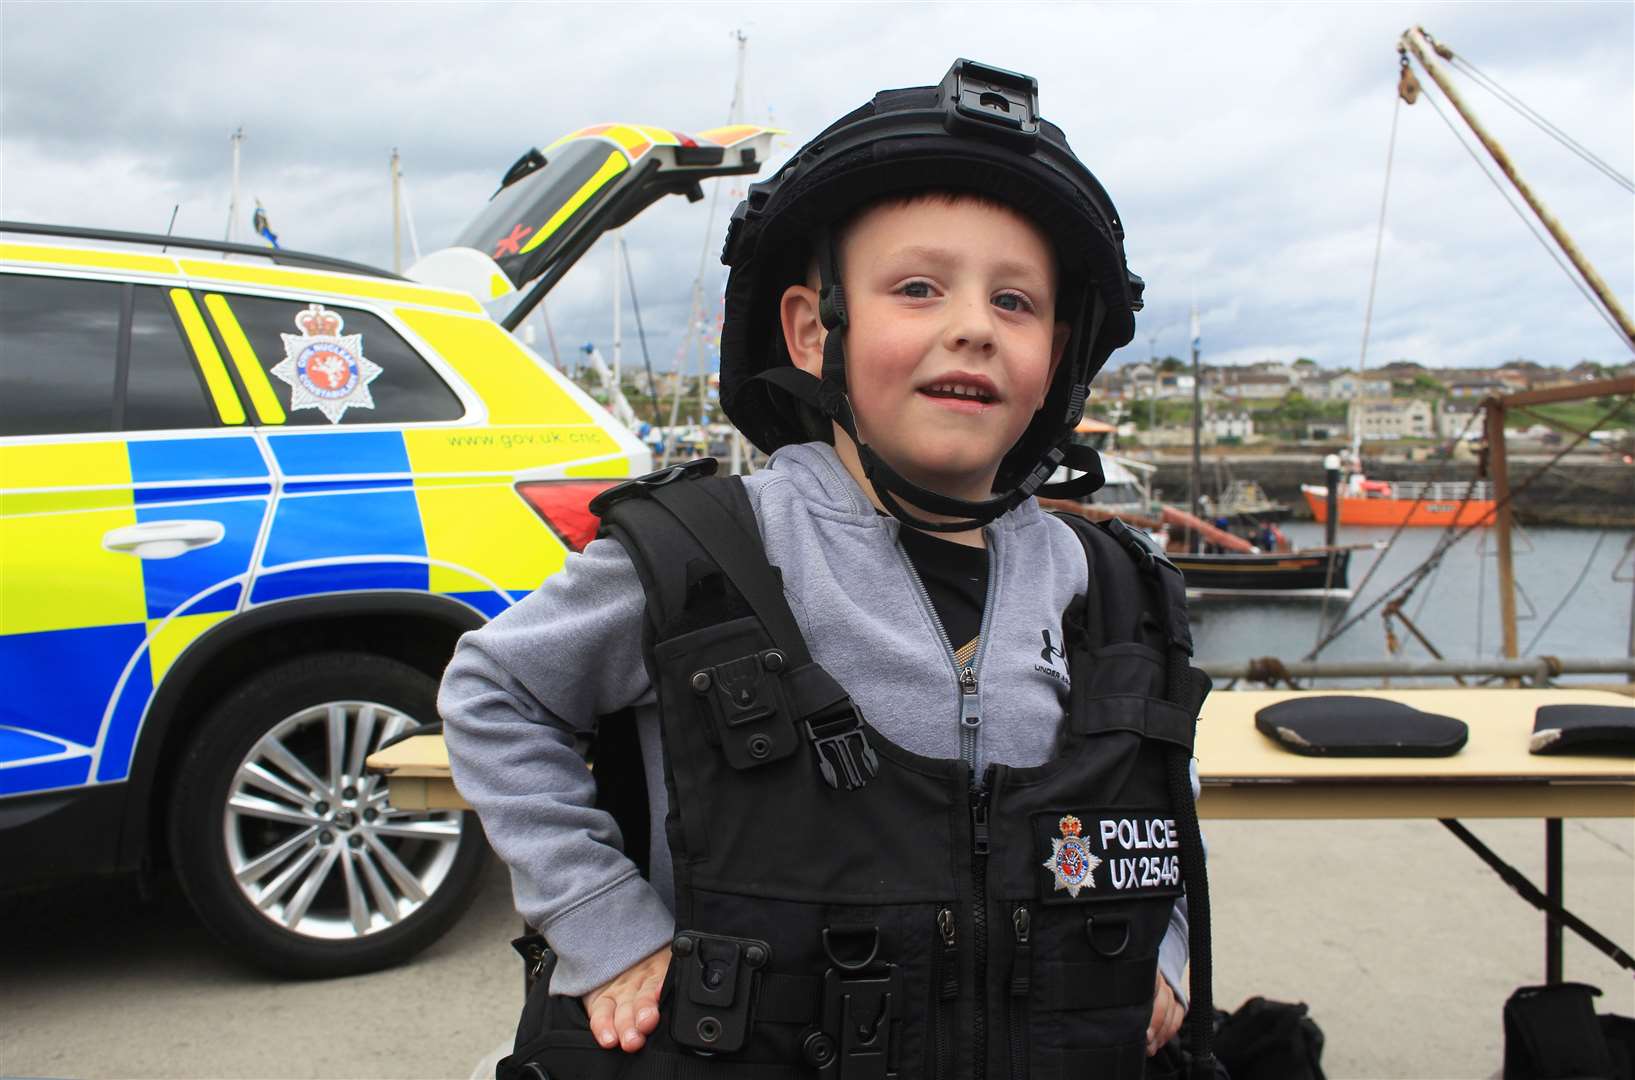 Noah Miller (7), from Wick, trying out some Civil Nuclear Constabulary kit. Picture: Alan Hendry